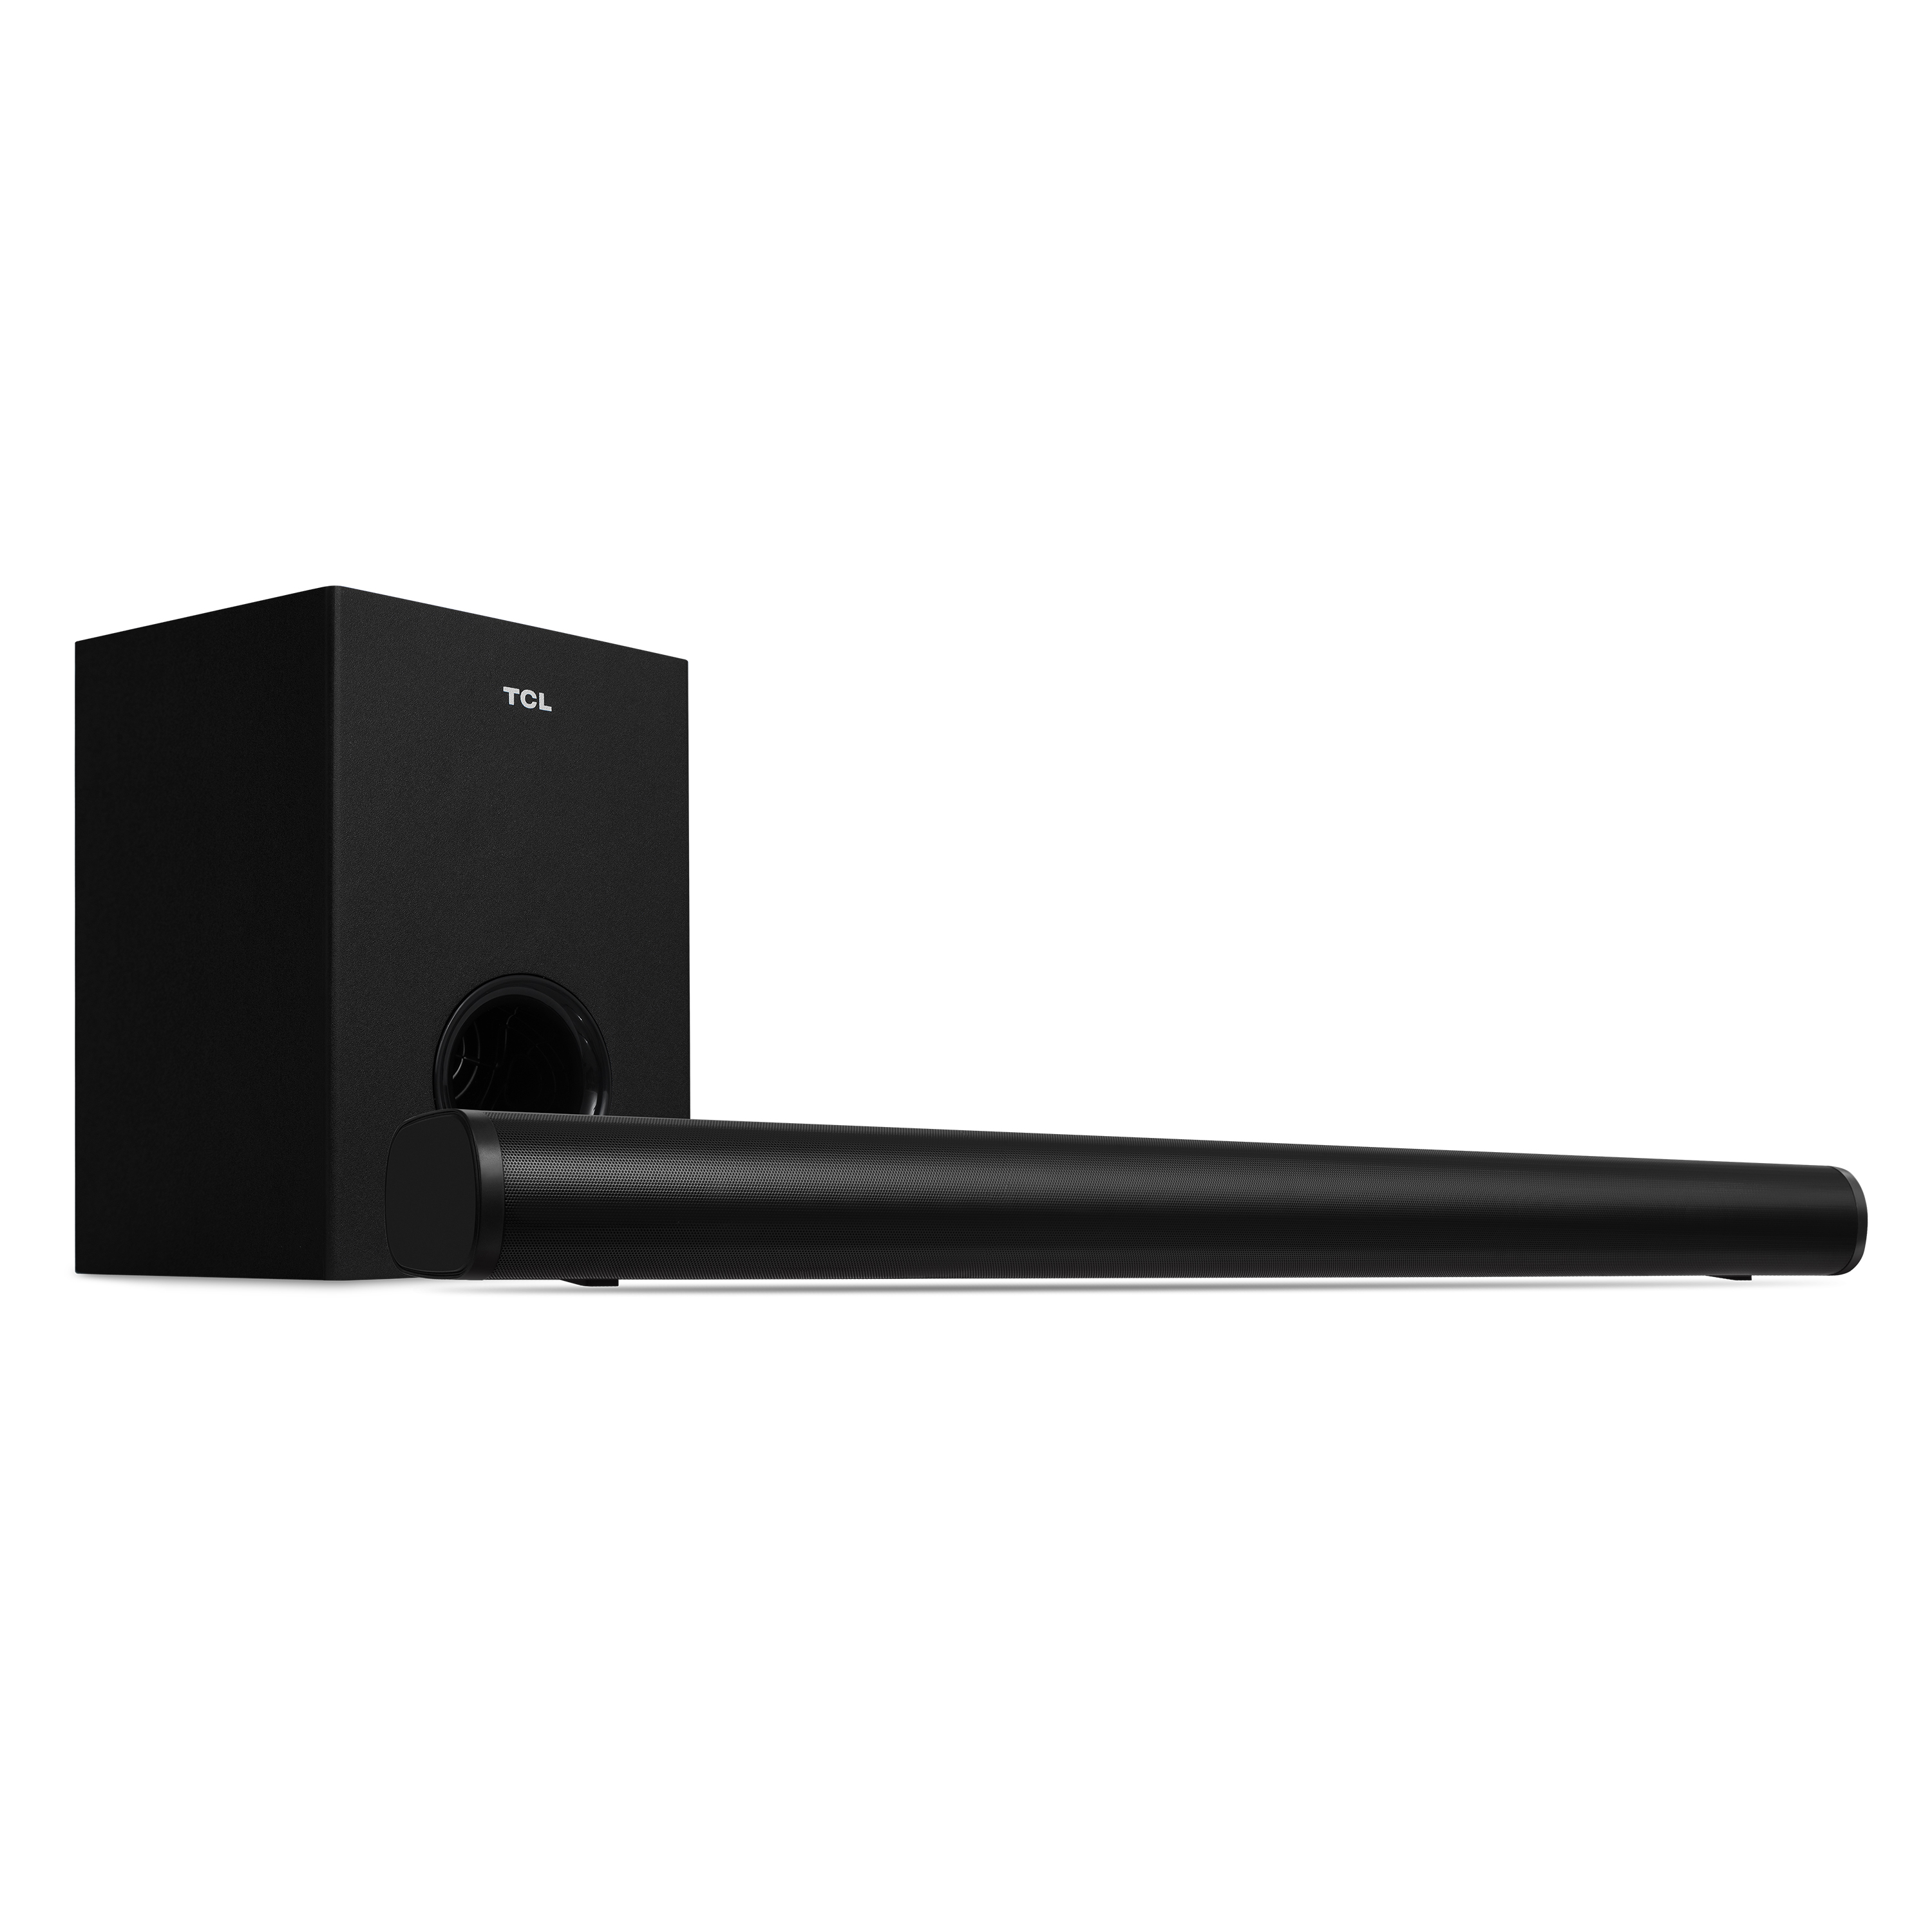 TCL Alto 5+ 2.1 Channel Home Theater Sound Bar with Wireless Subwoofer, Bluetooth 5.0, 31.8 inch, Black - S522W - image 1 of 5